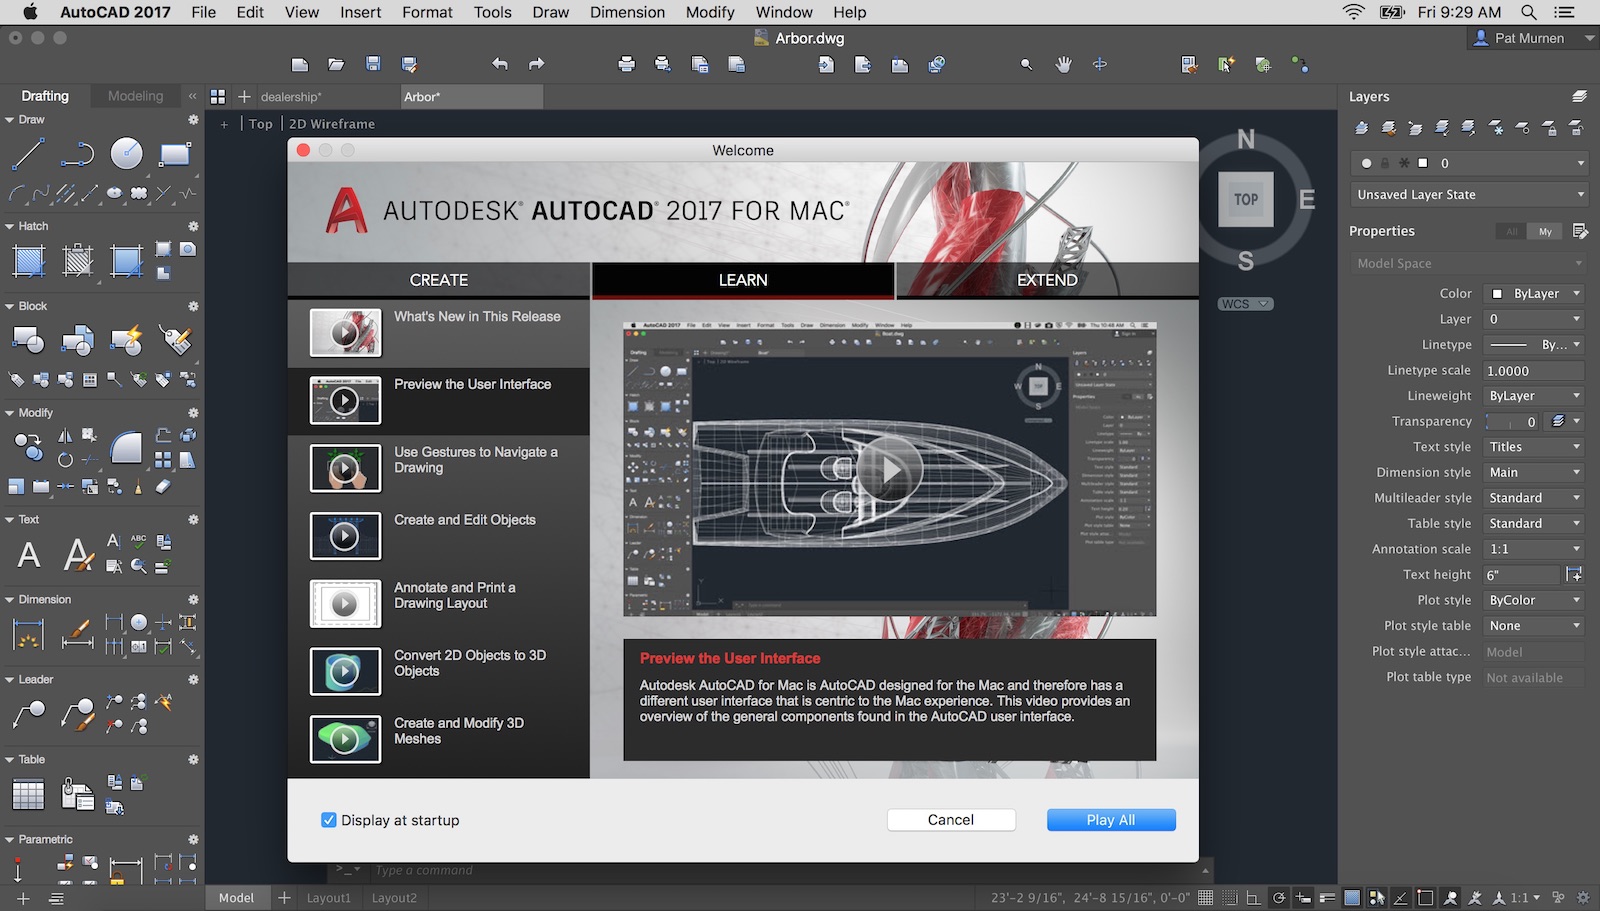 tool palette in autocad